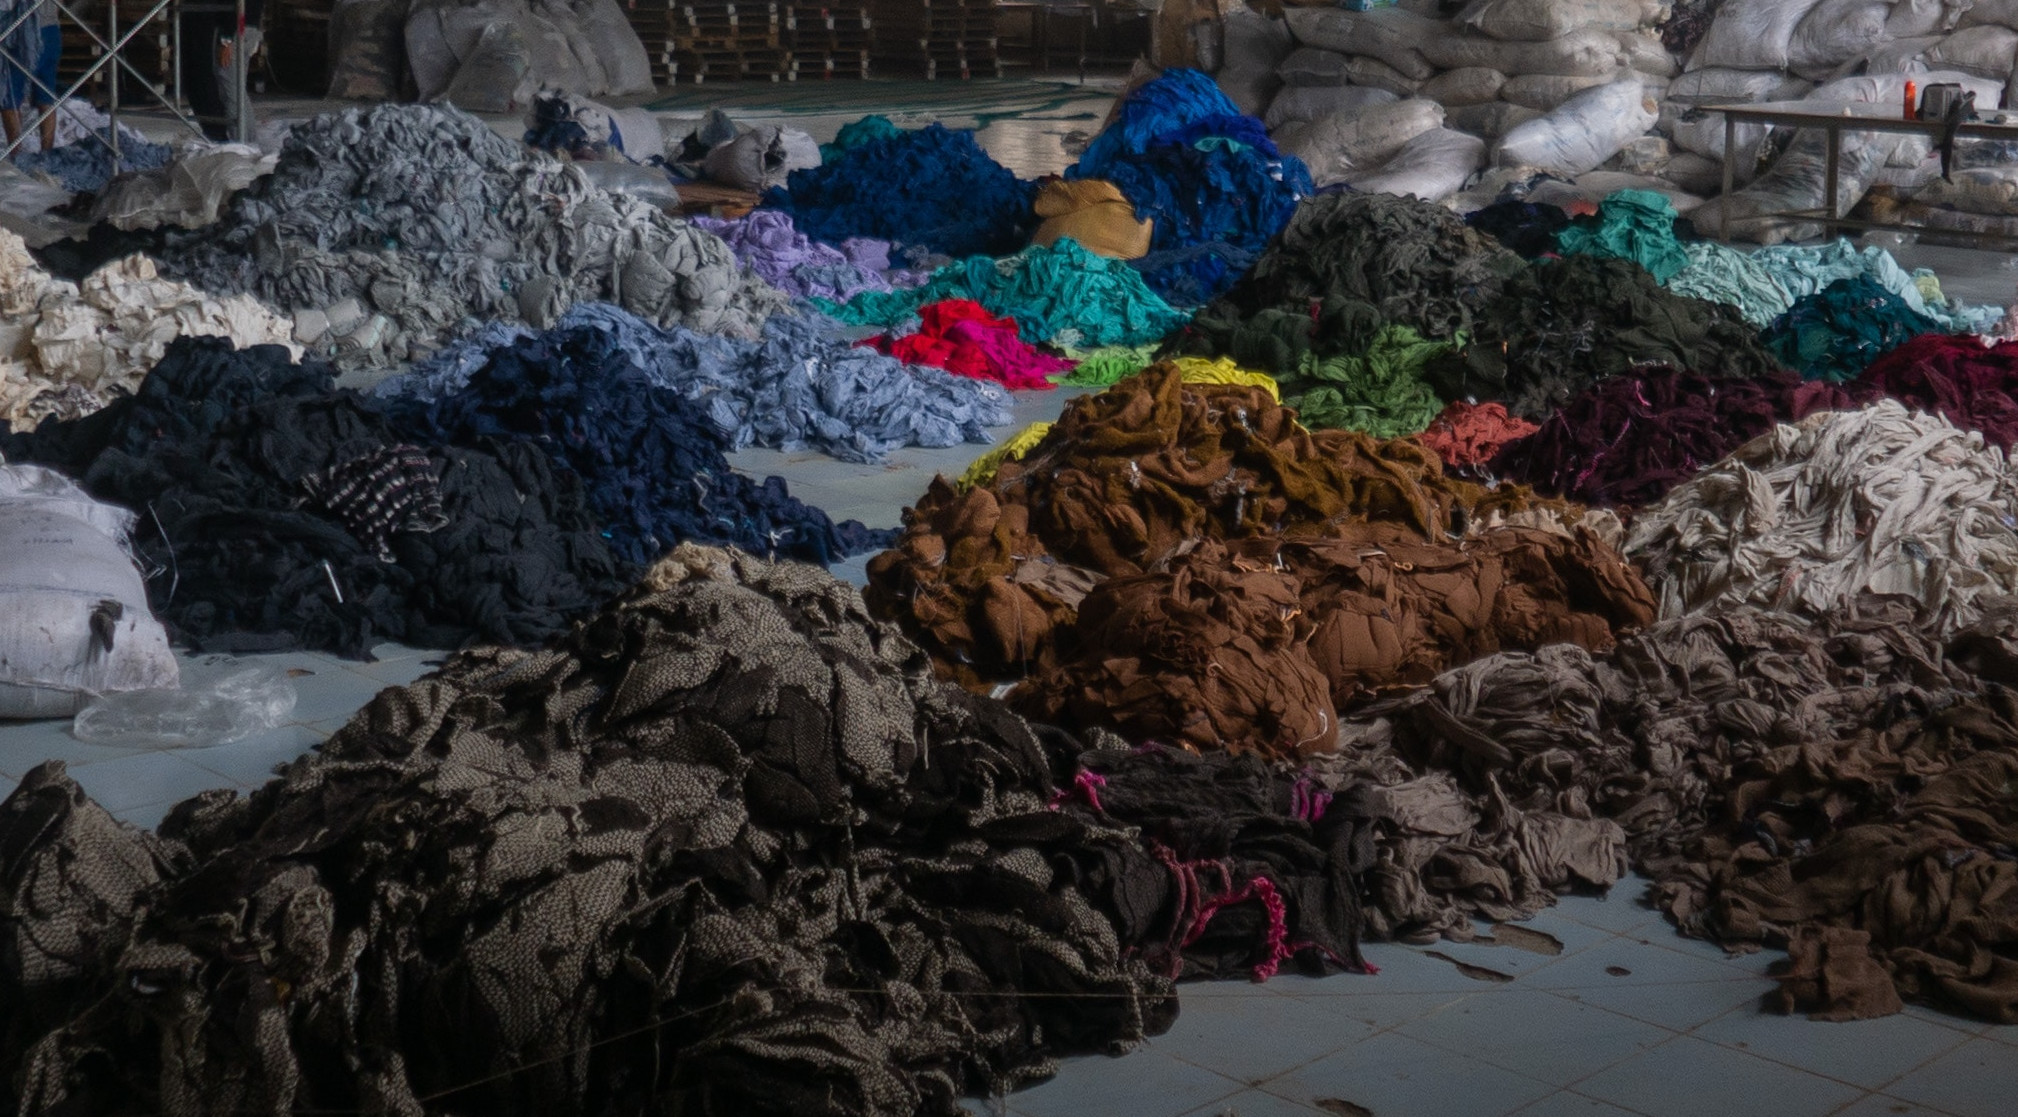 Piles of textile waste